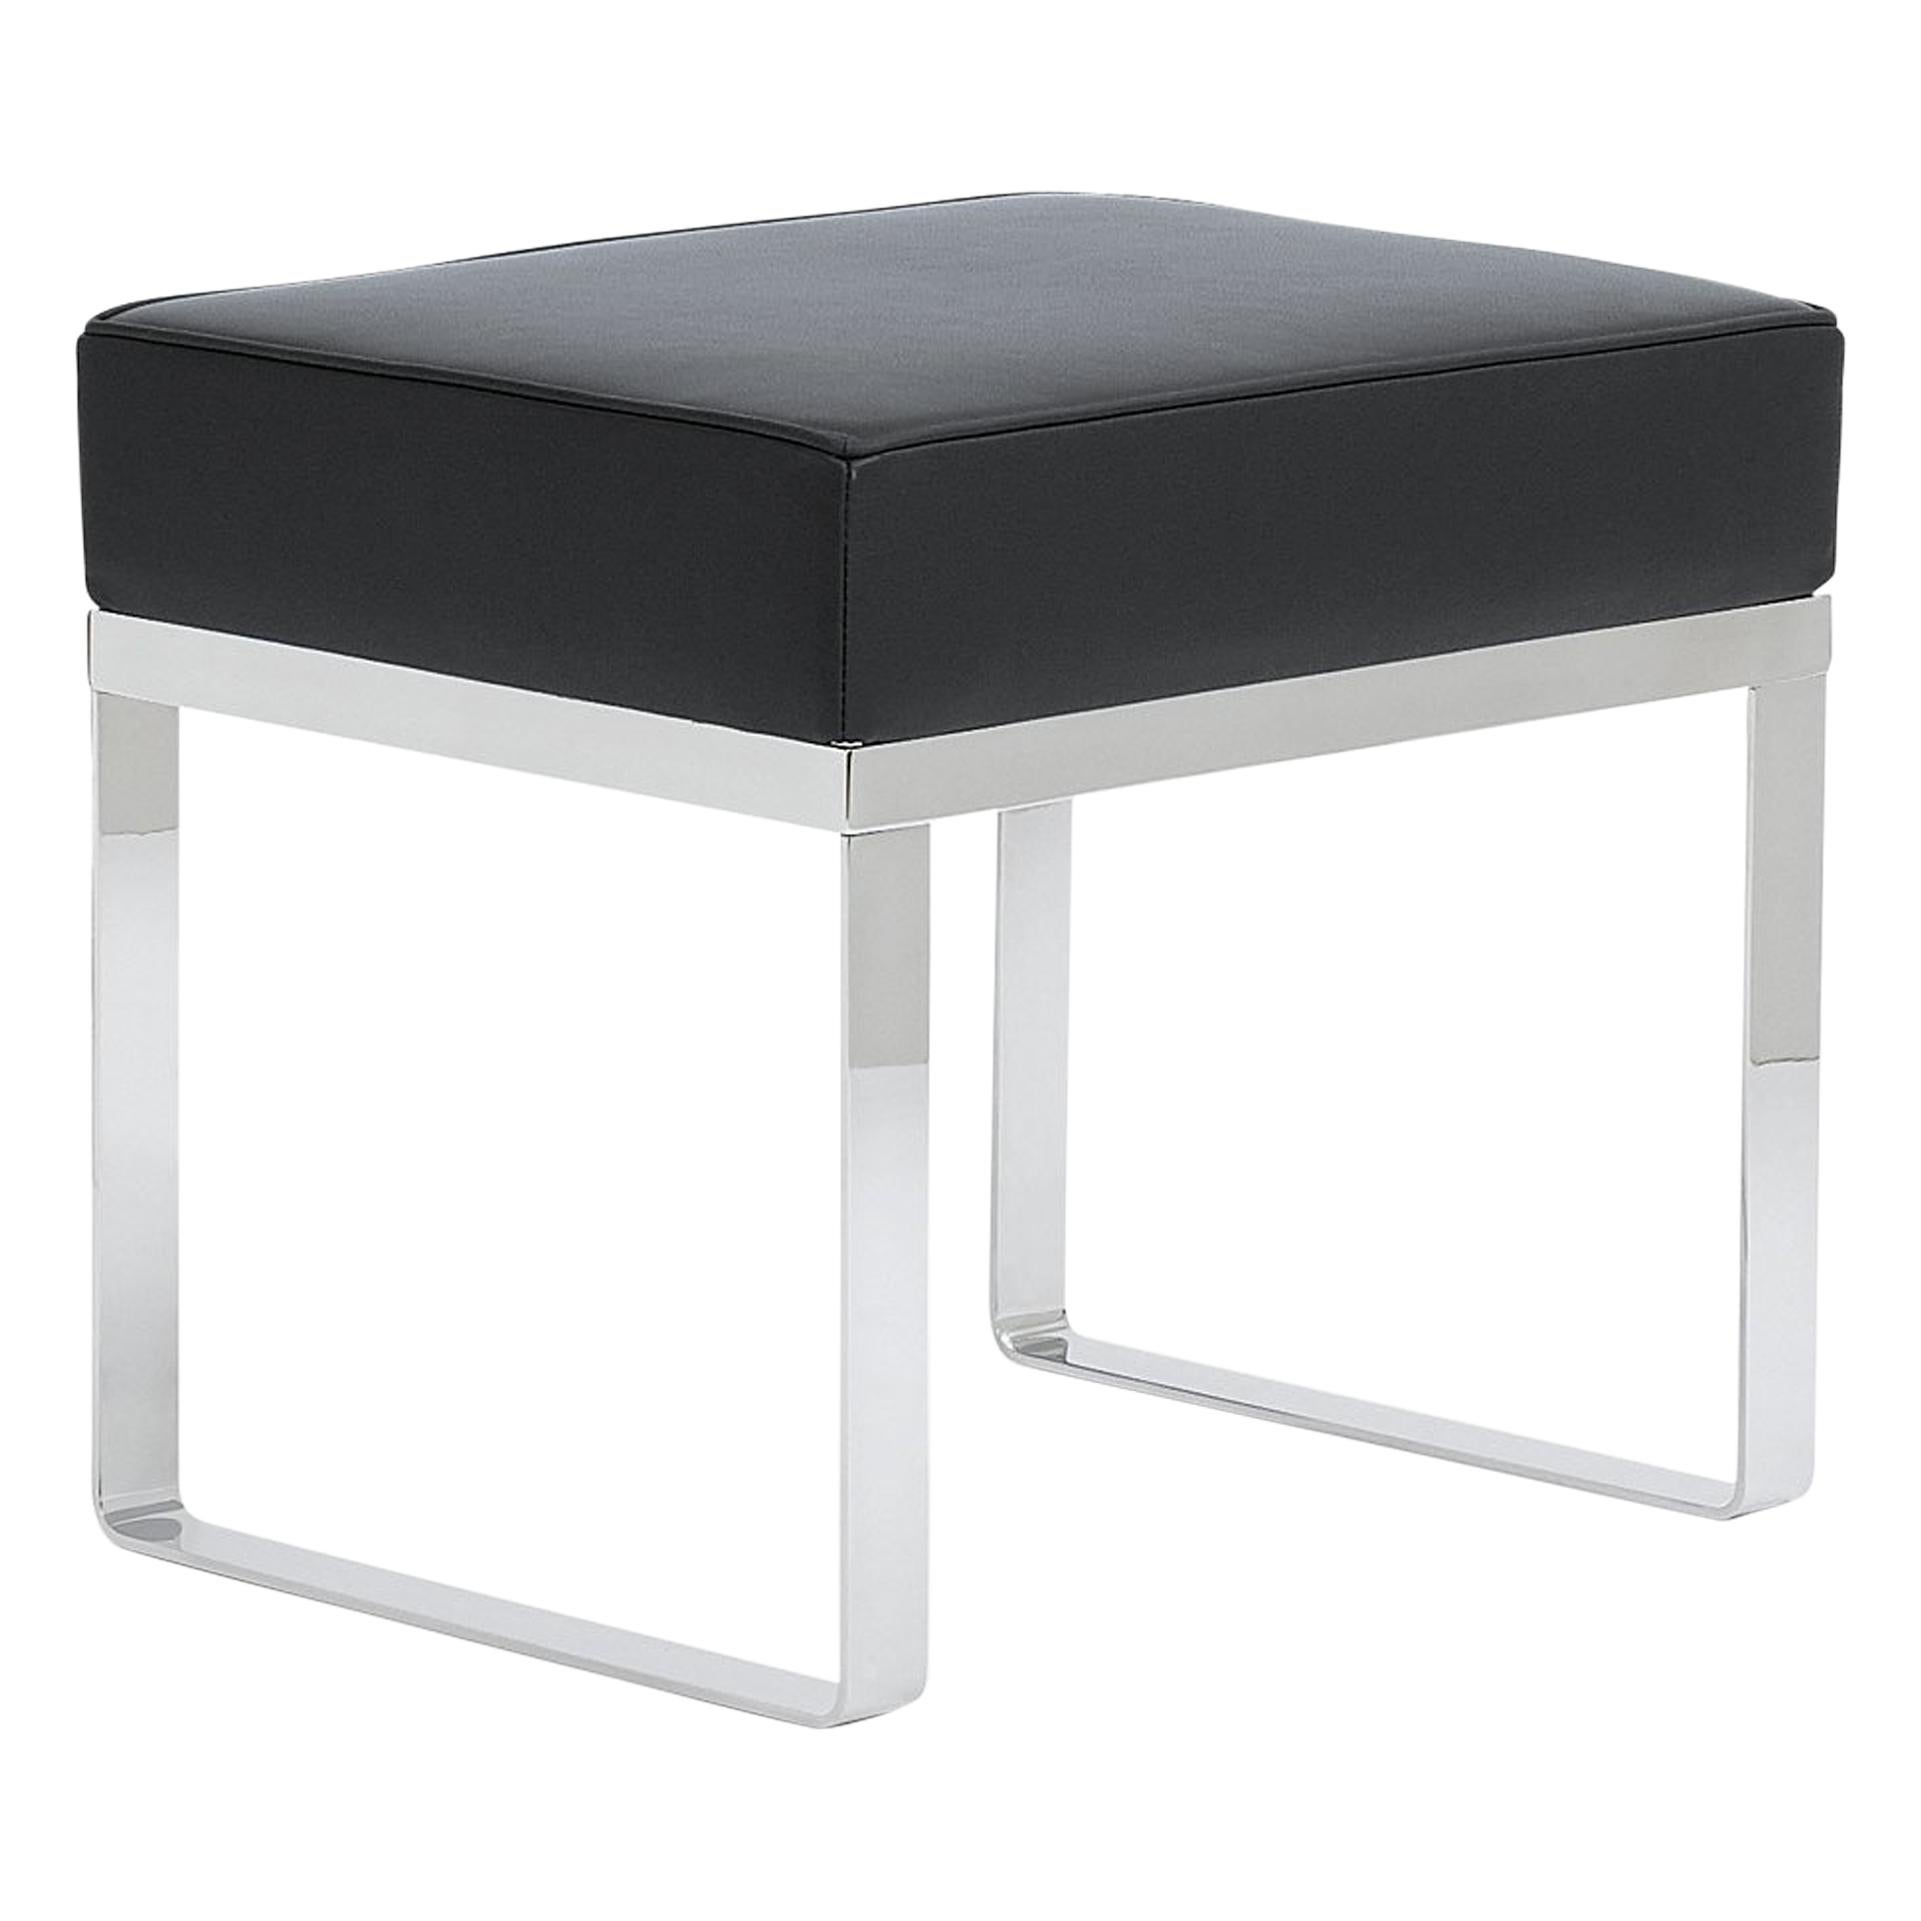 Customizable ClassiCon Banu Stool  by Eckart Muthesius